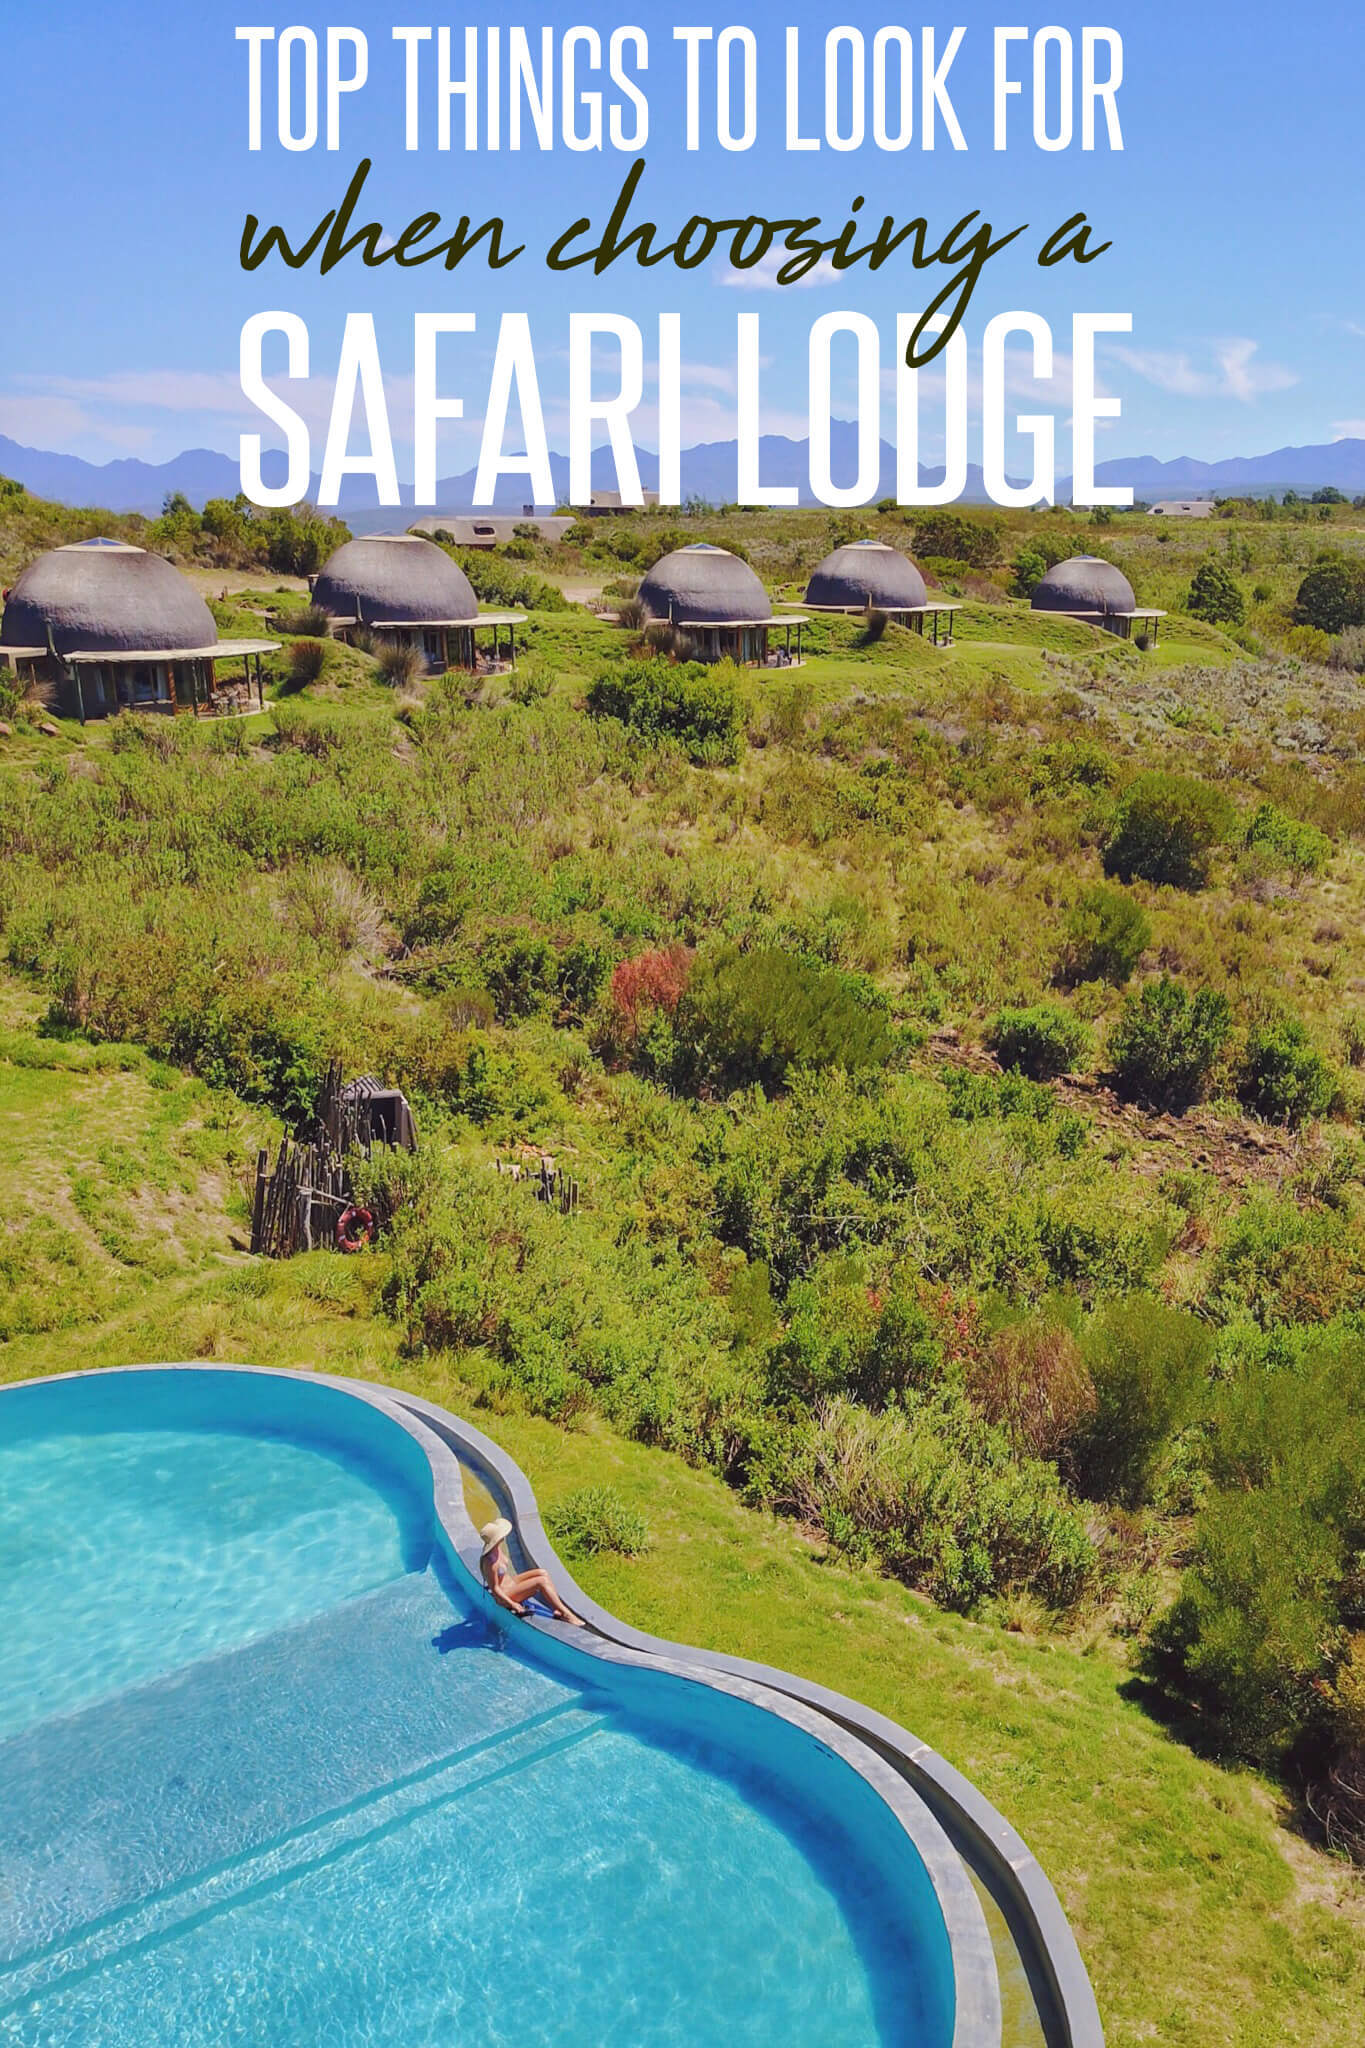 Top Things to look for when choosing a Safari Lodge